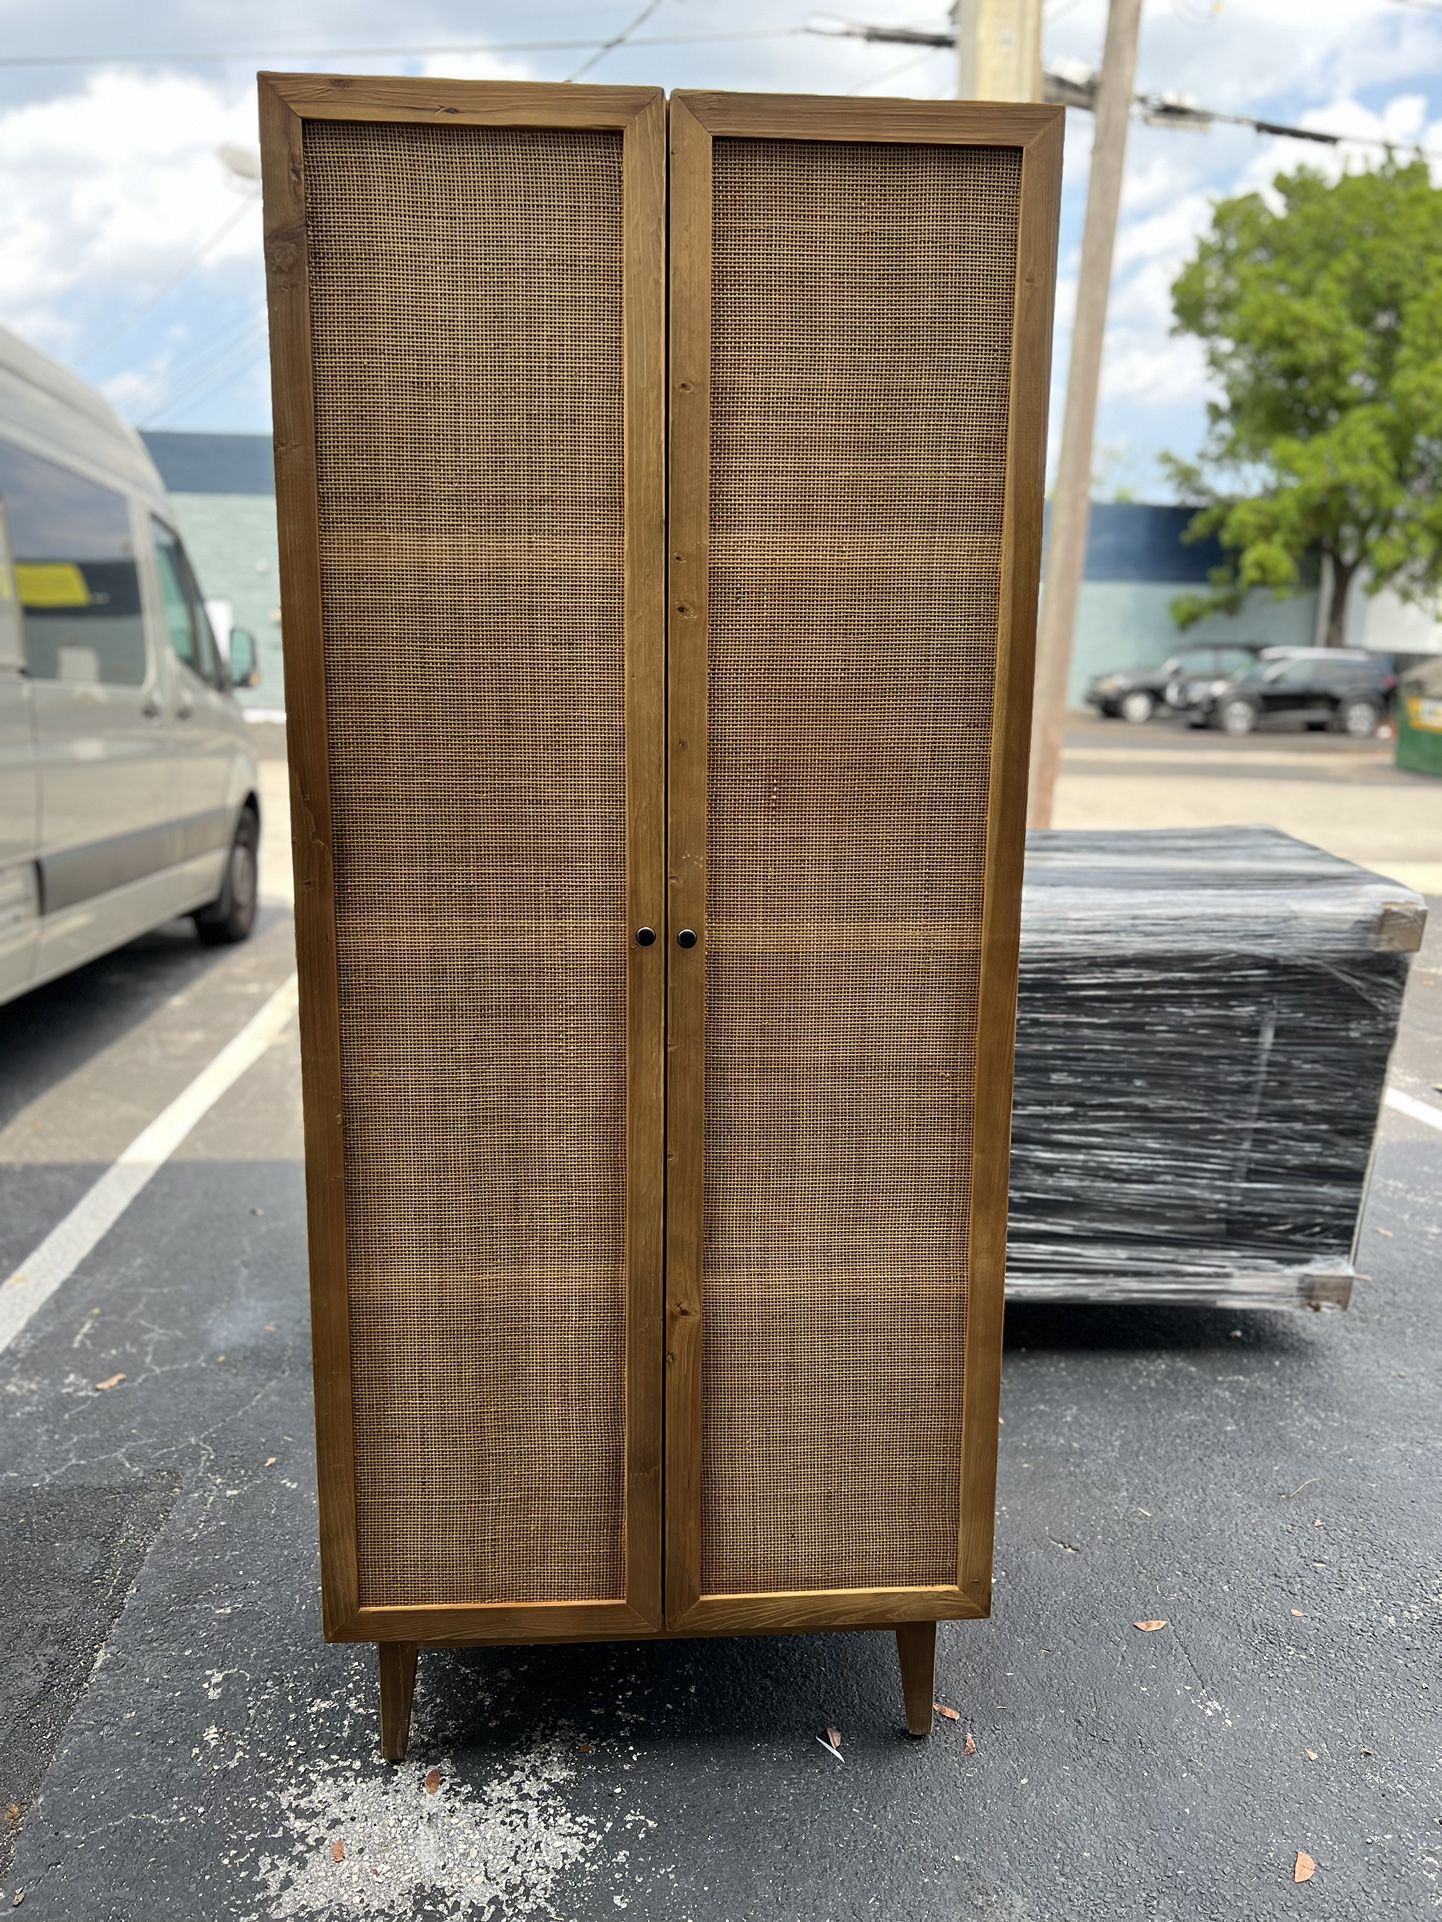 🔥 Sale SOLID WOOD Pine & Rattan Wardrobe Cabinet with Shelves ( Original Price $2950 )